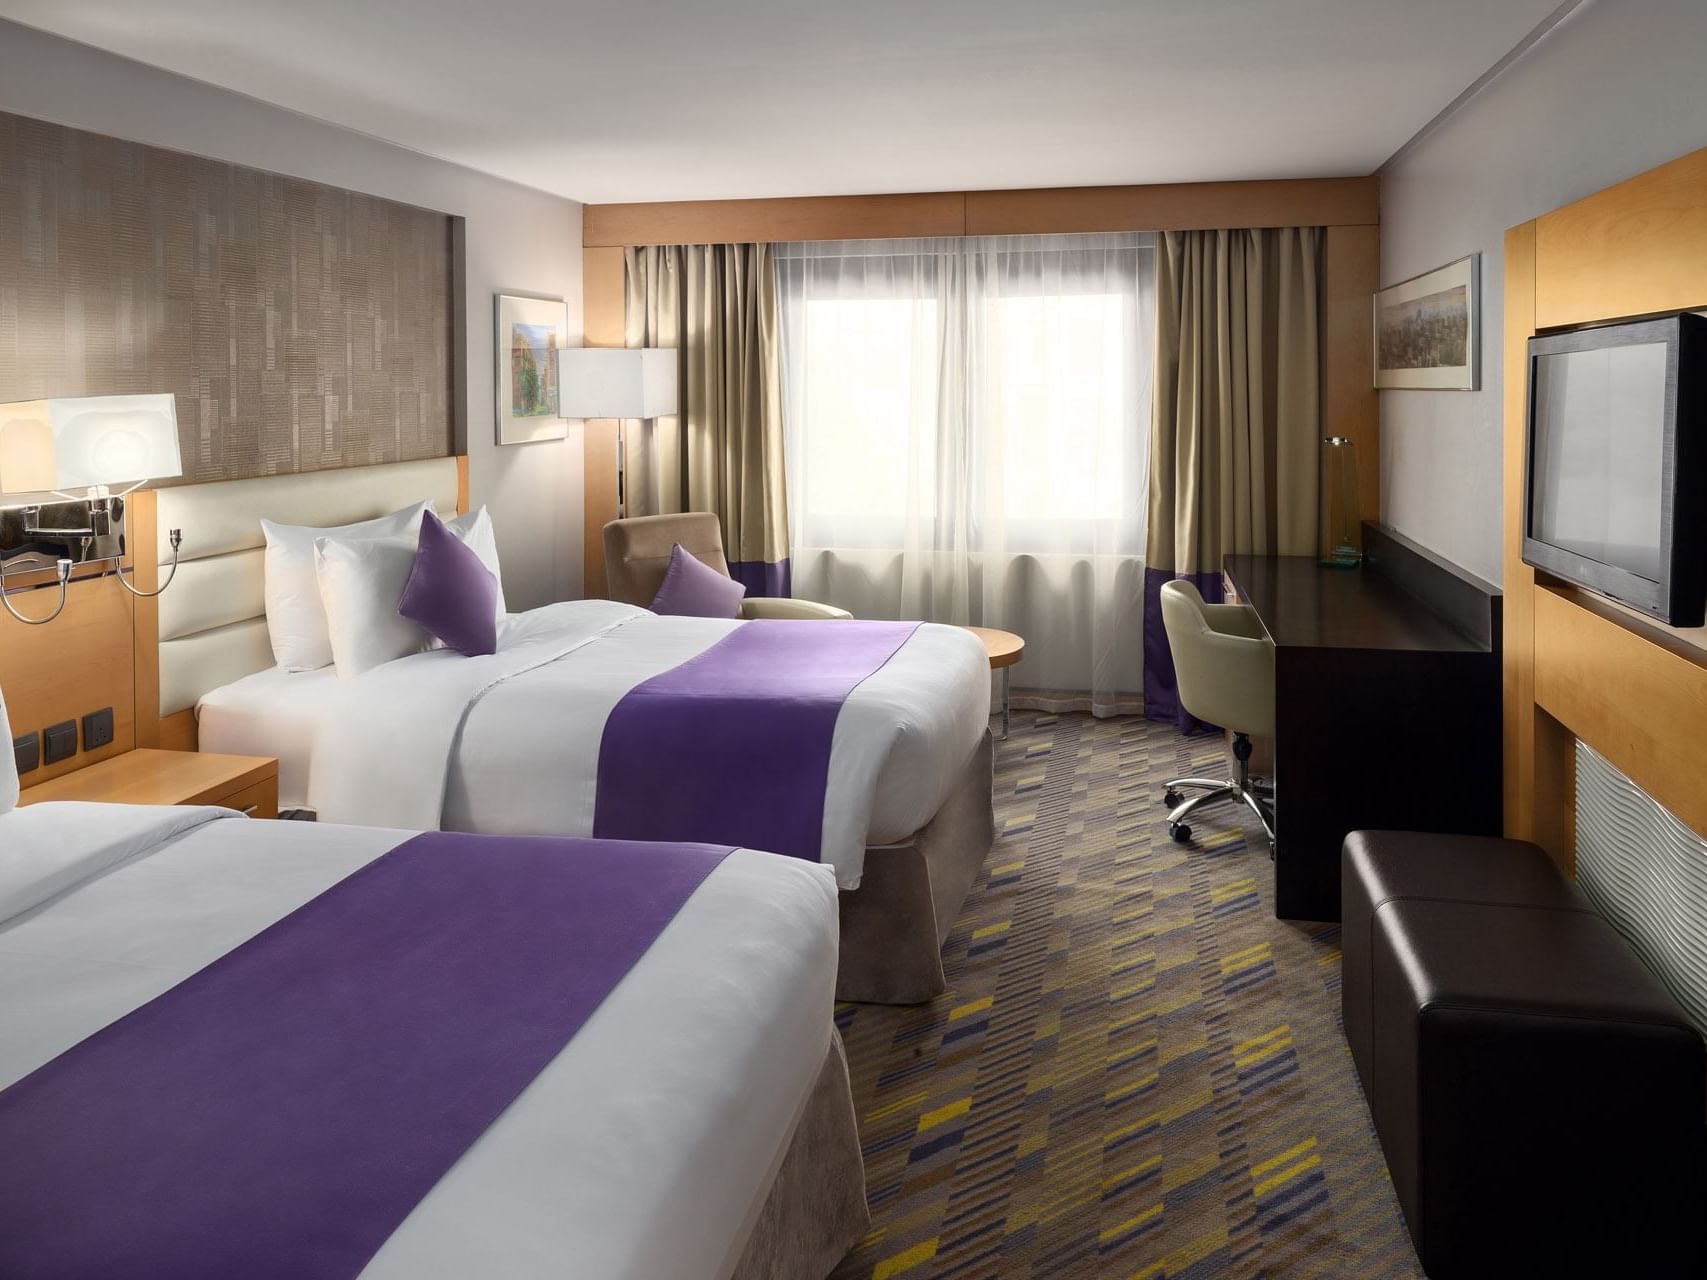 TV & 2 beds in Deluxe twin Suite at Mena Plaza Hotel